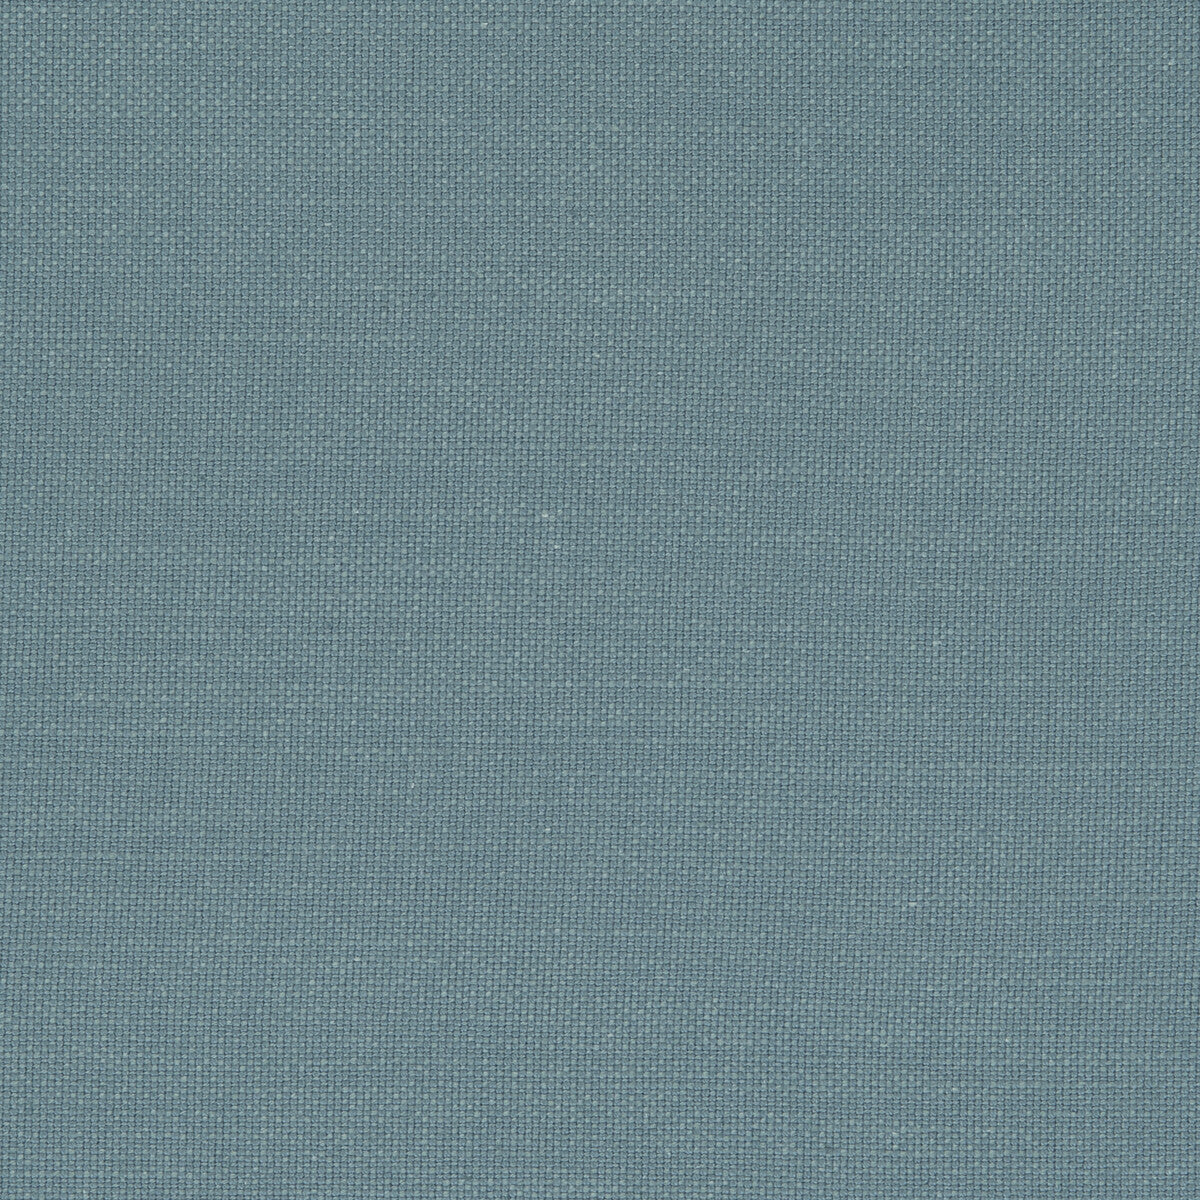 Nantucket fabric in lagoon color - pattern F0594/28.CAC.0 - by Clarke And Clarke in the Clarke &amp; Clarke Nantucket collection